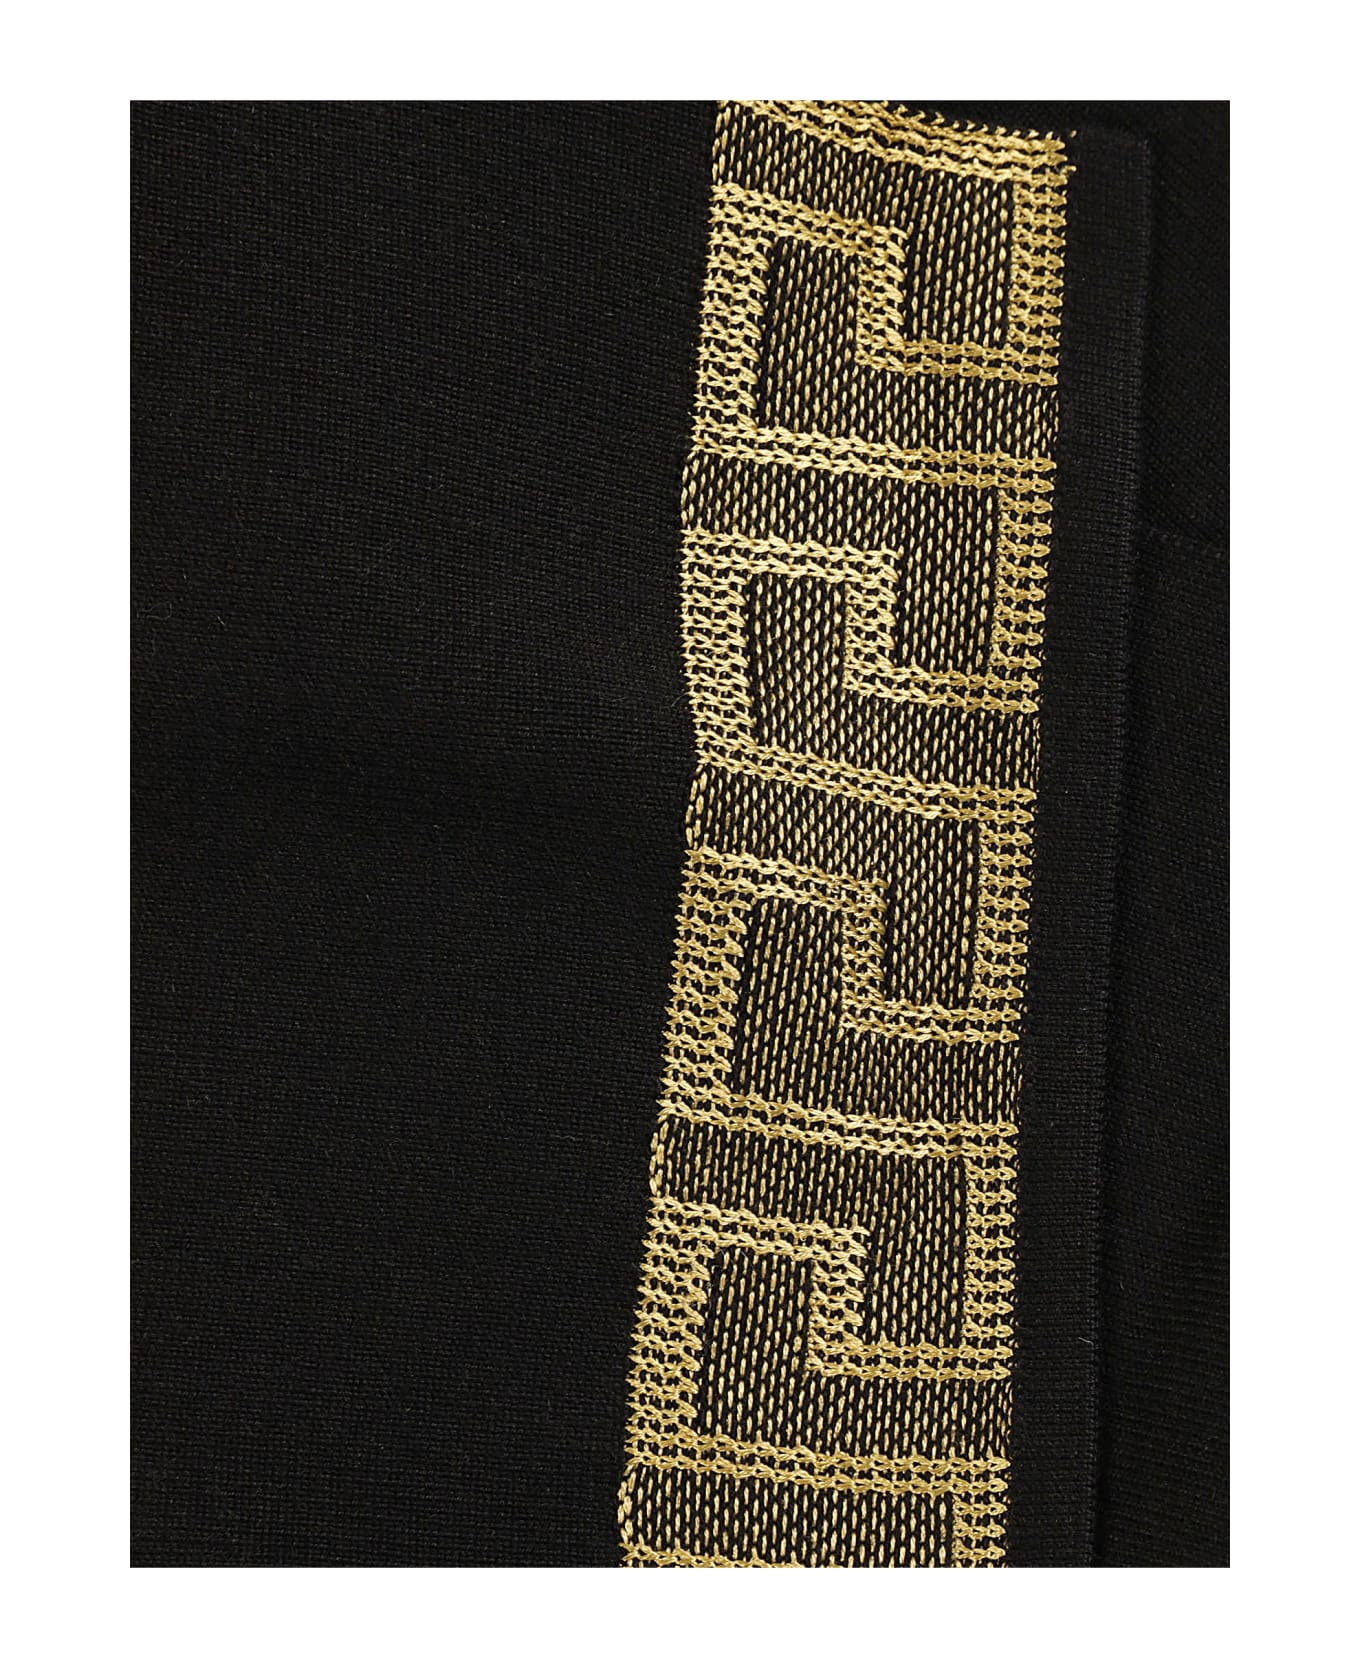 Versace Logo Embroidered Scarf - Black